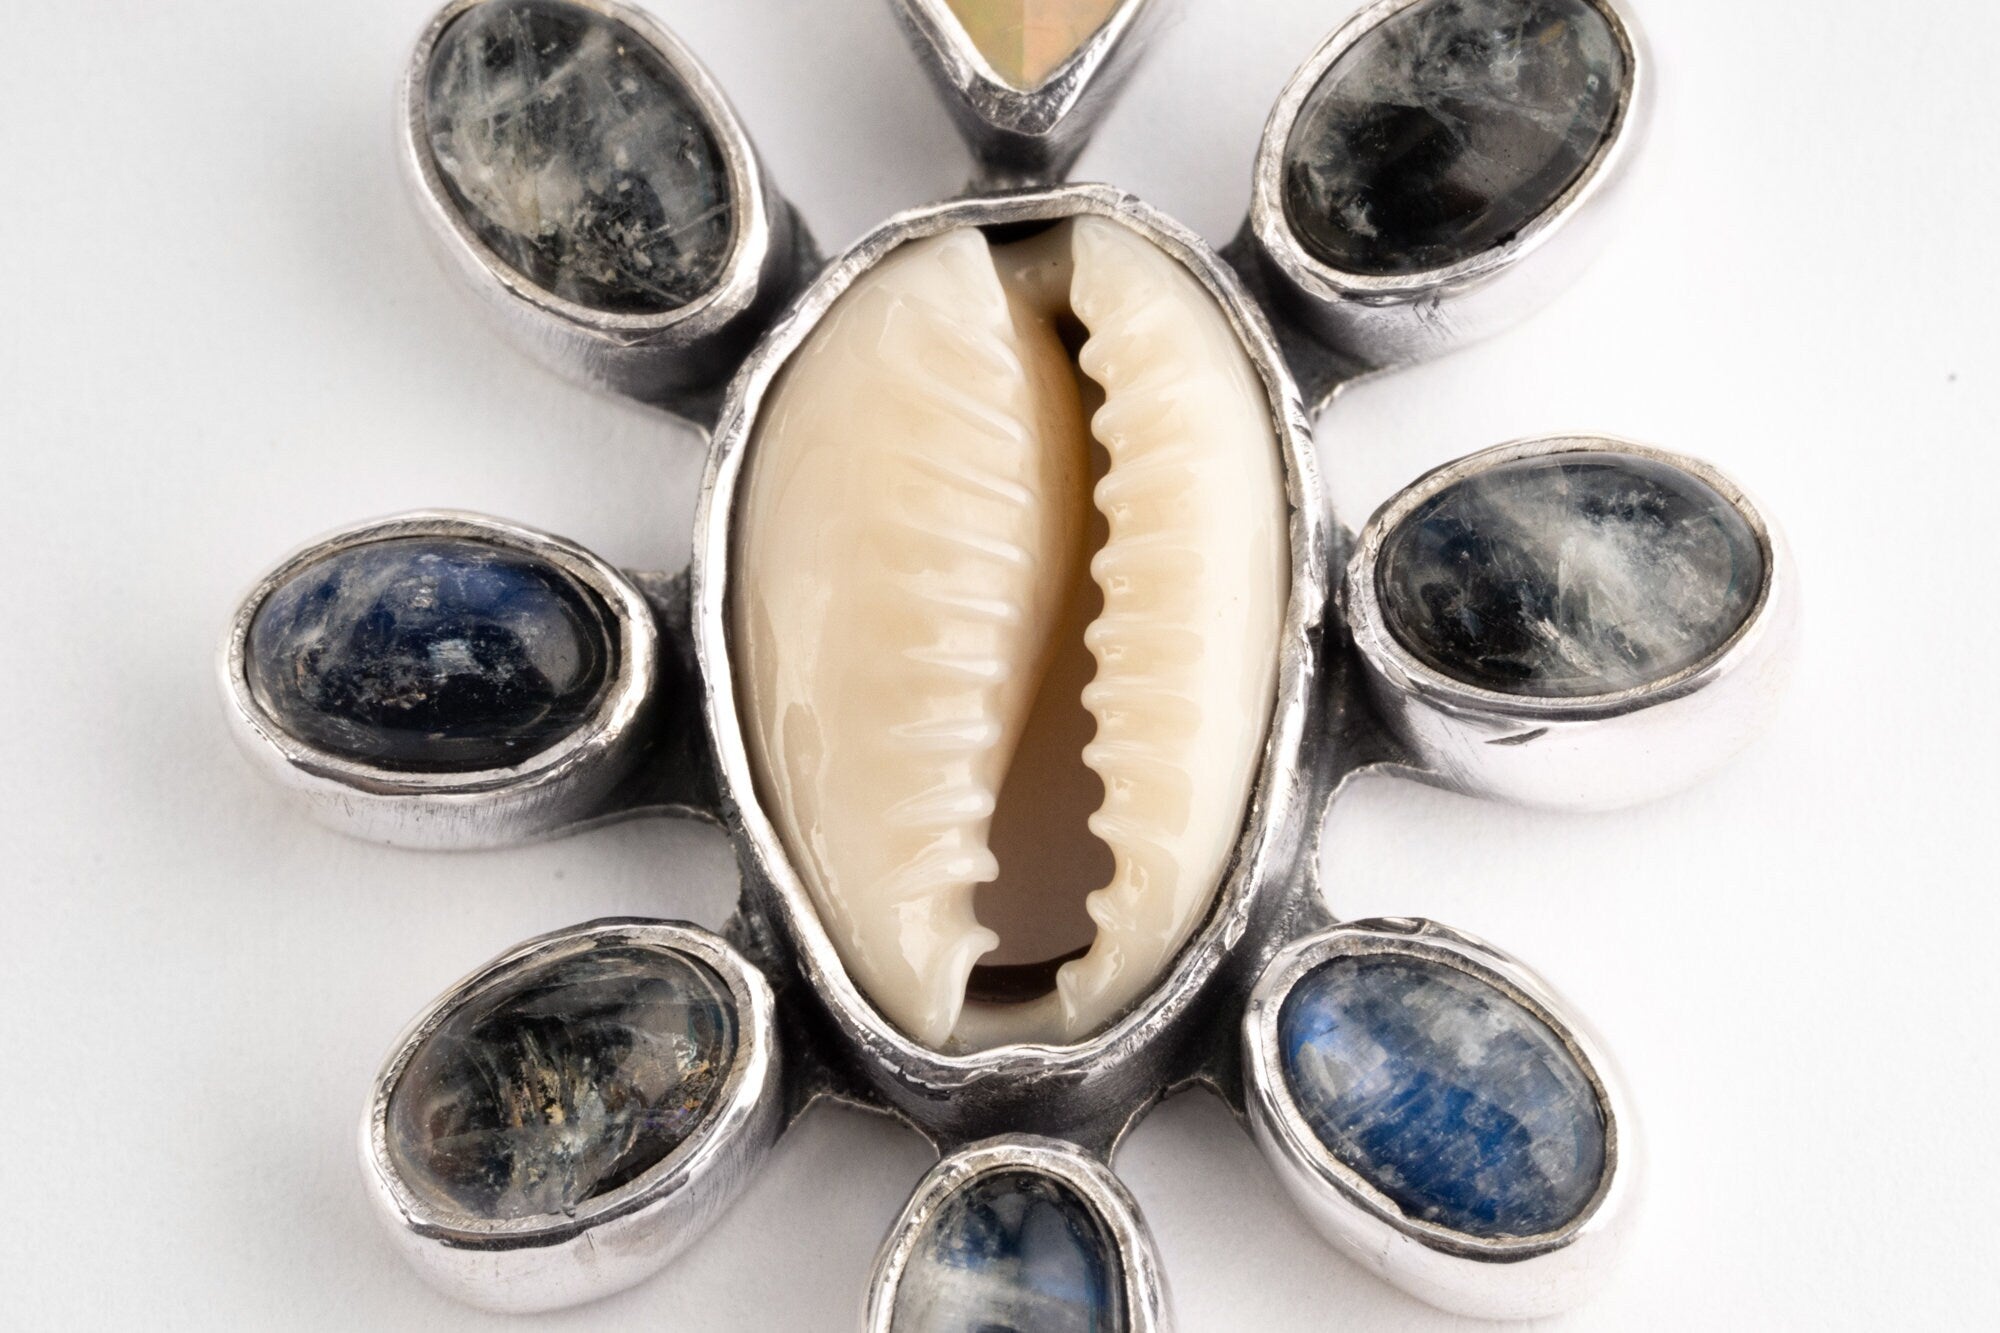 Cowrie Shell. Moonstone & Opal - 925 Sterling Silver - Mandala Setting - Pendant Necklace